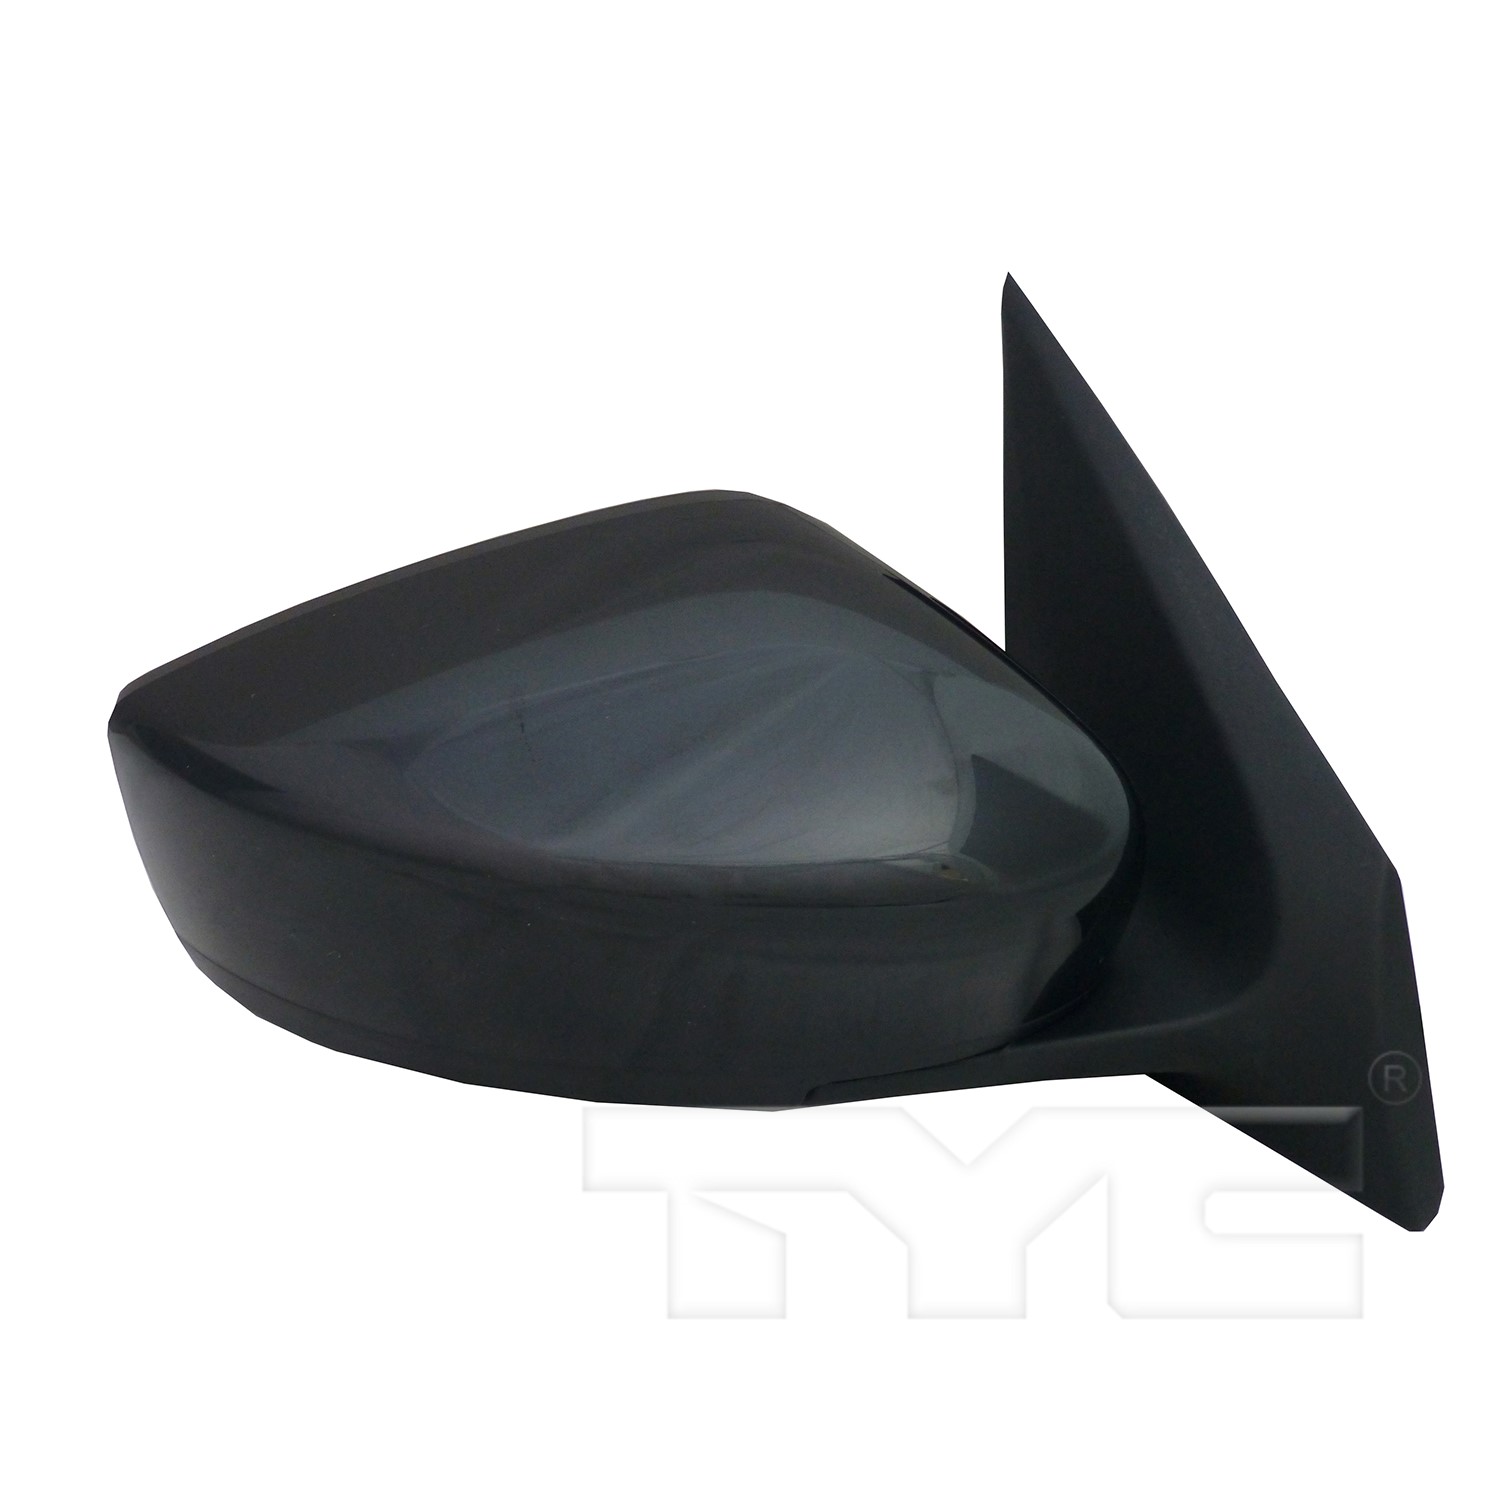 Aftermarket MIRRORS for NISSAN - VERSA, VERSA,15-19,RT Mirror outside rear view